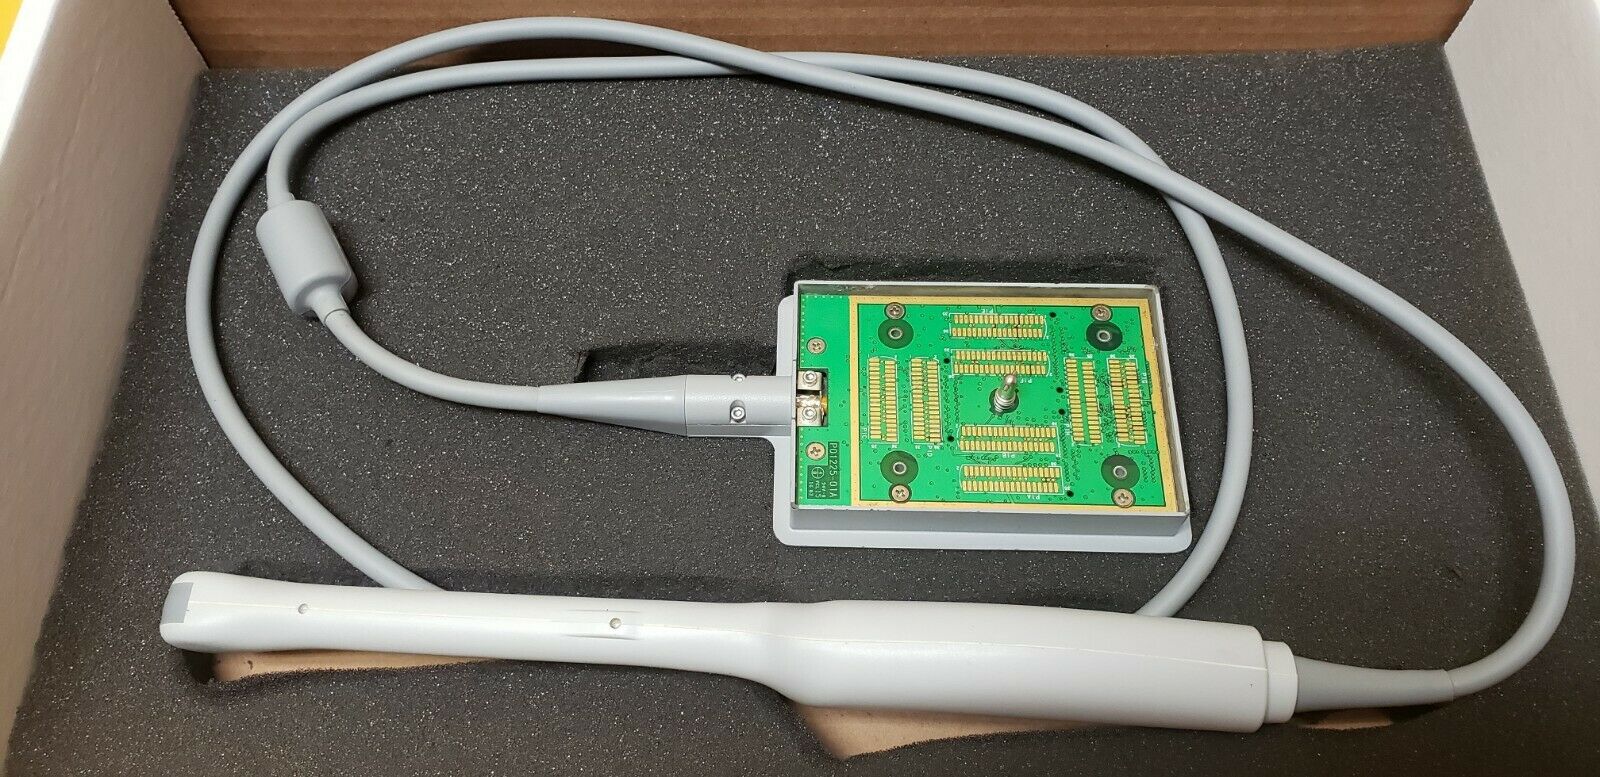 SonoSite ICT/7-4 MHZ Vaginal Ultrasound Transducer Probe  Made in USA DIAGNOSTIC ULTRASOUND MACHINES FOR SALE